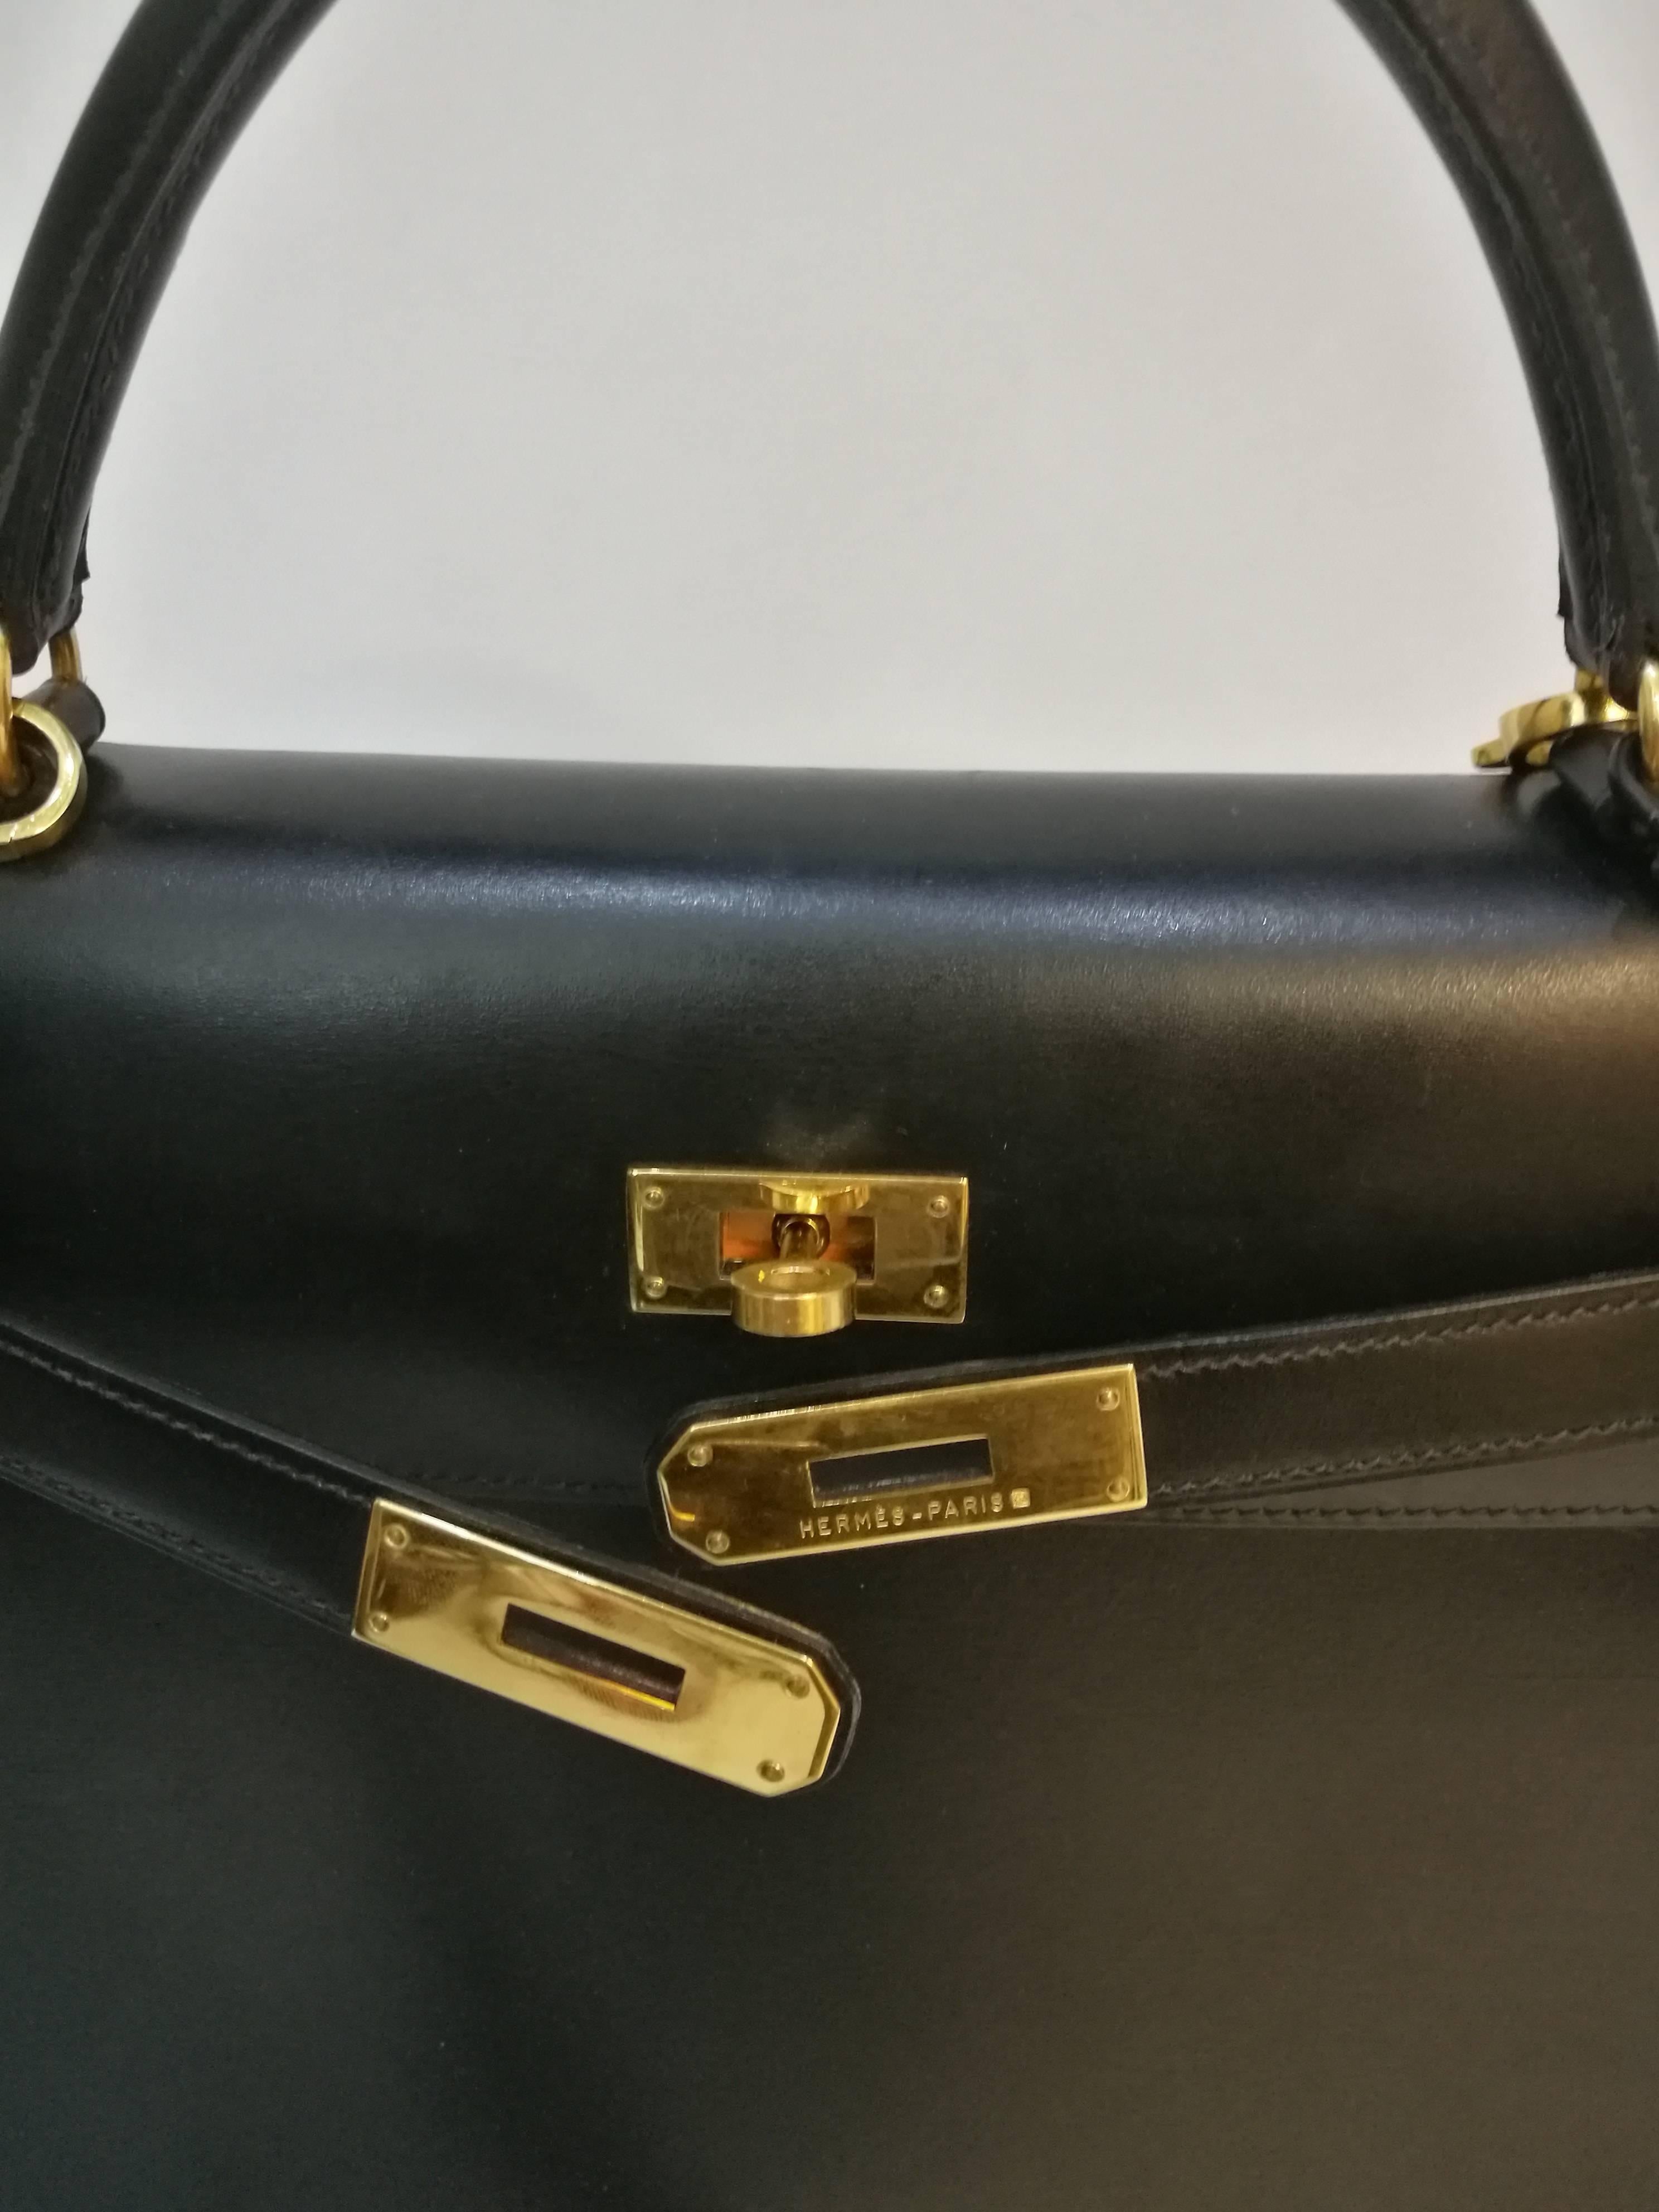 Hermes Black Leather Kelly
Gold tone hardware
totally made in france
